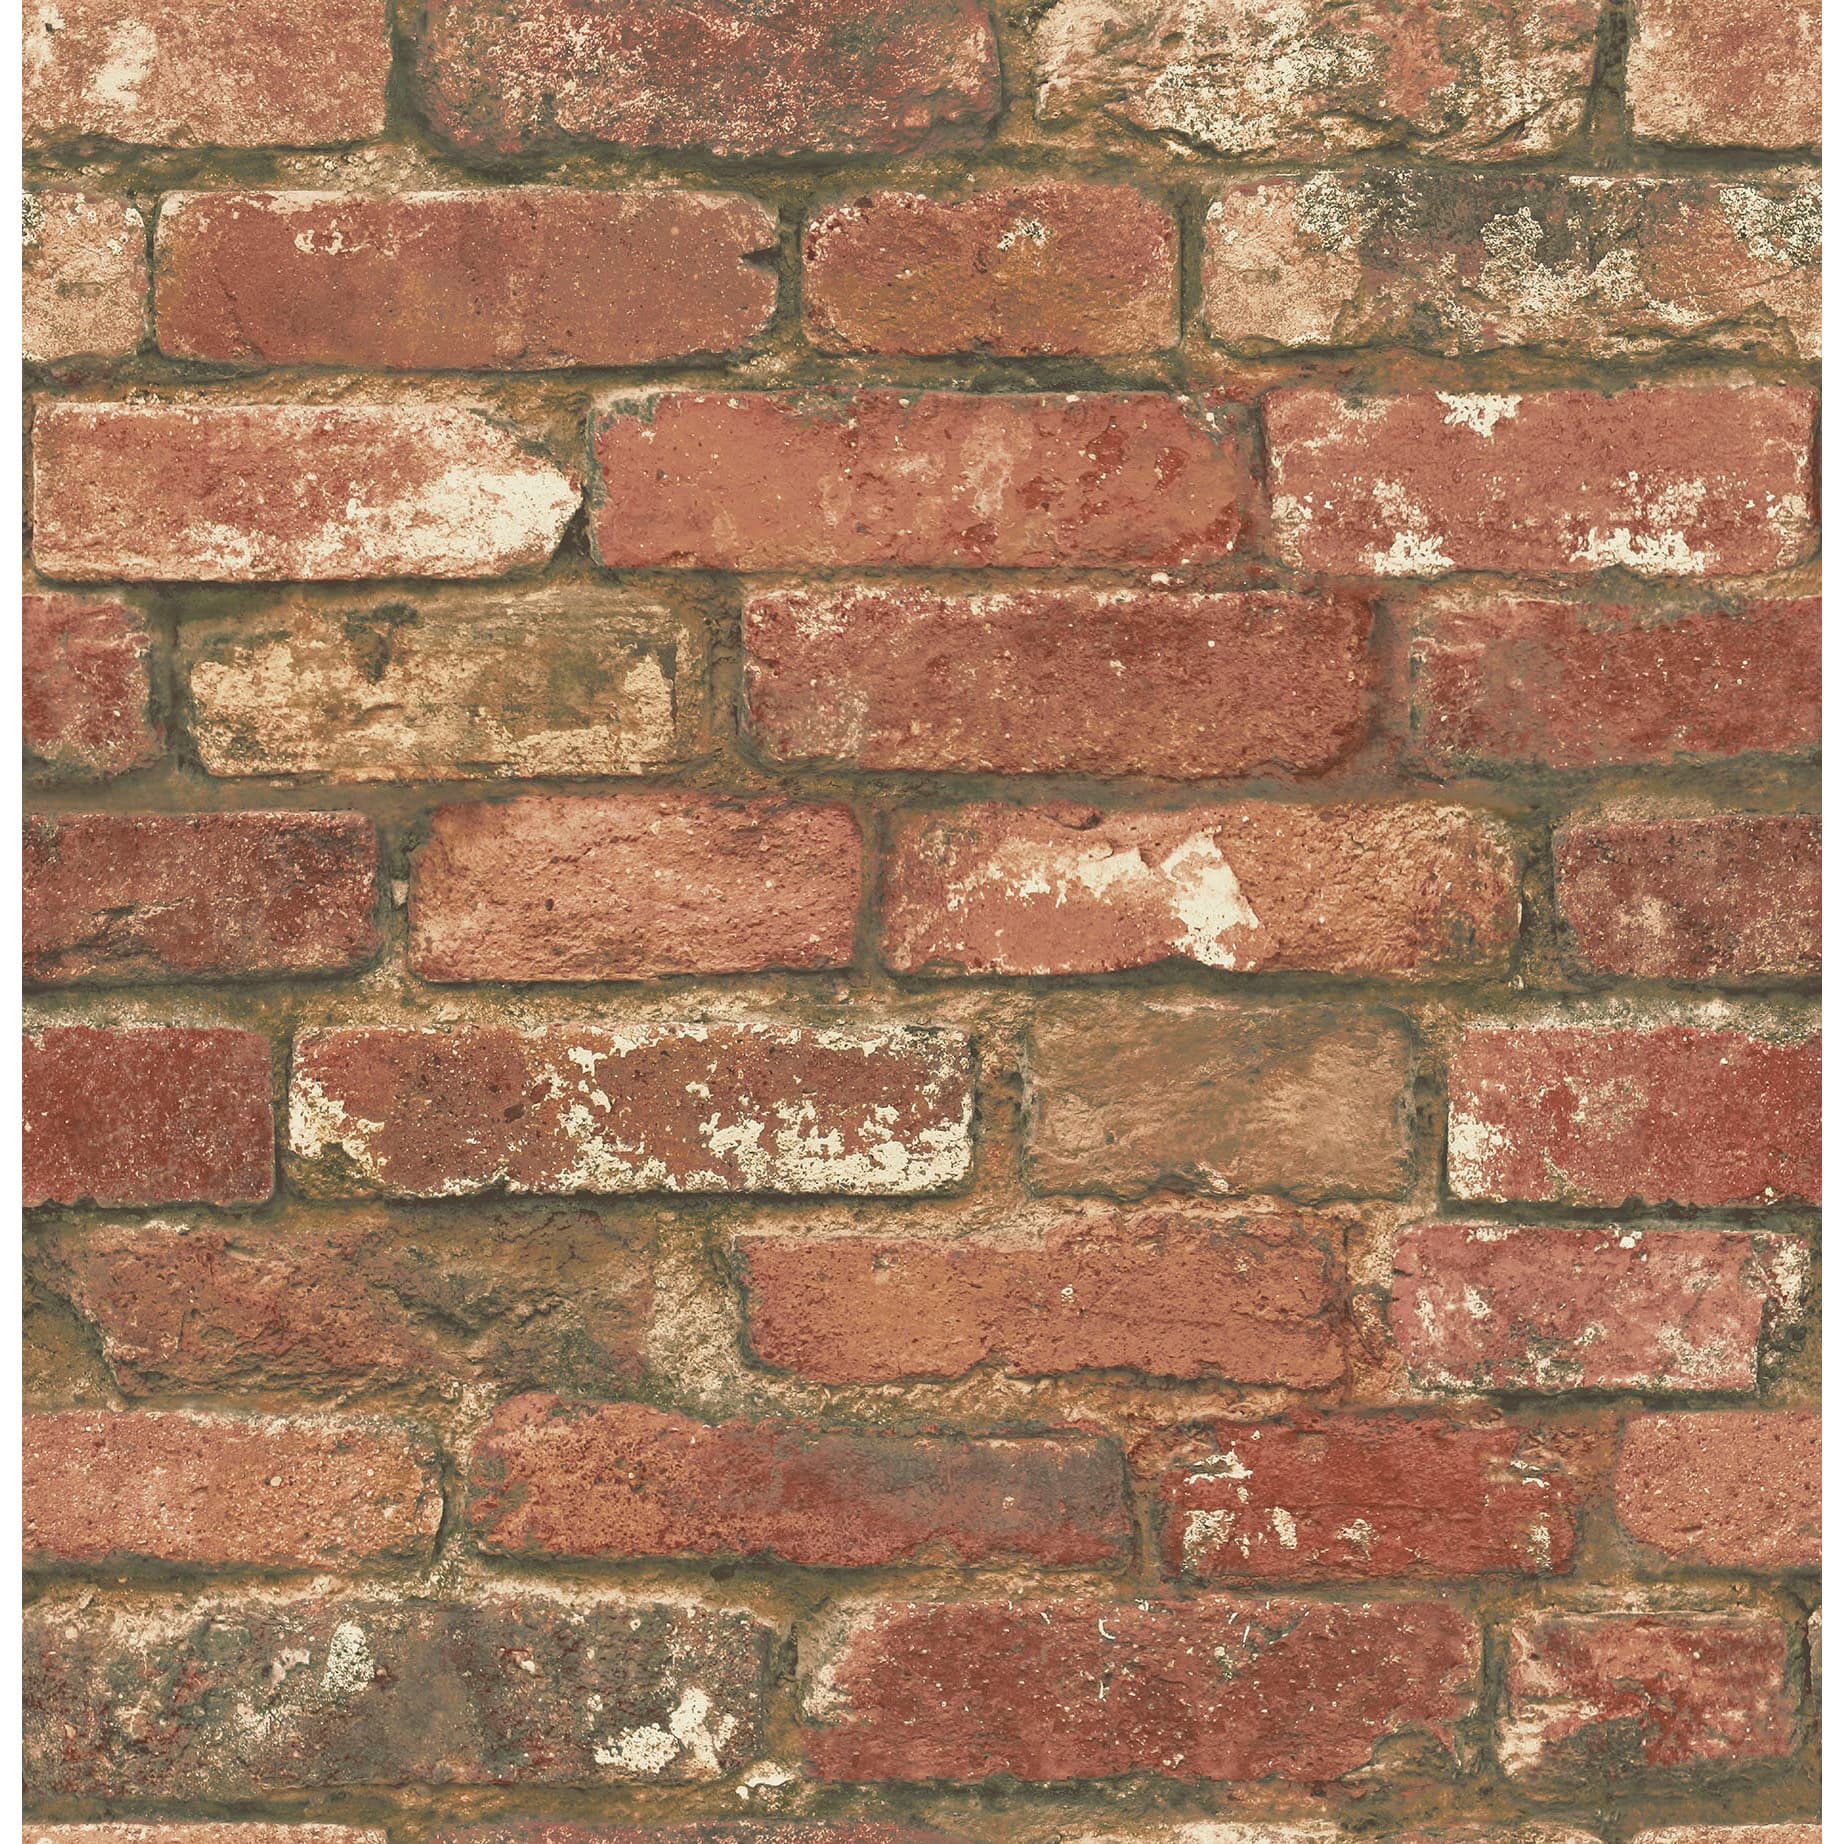 Buy JAAMSO ROYALS White brick Design wallpaper selfadhesive peel  stick   45 CM x 600 CM  Pack of 1 Online at Low Prices in India  Paytmmallcom